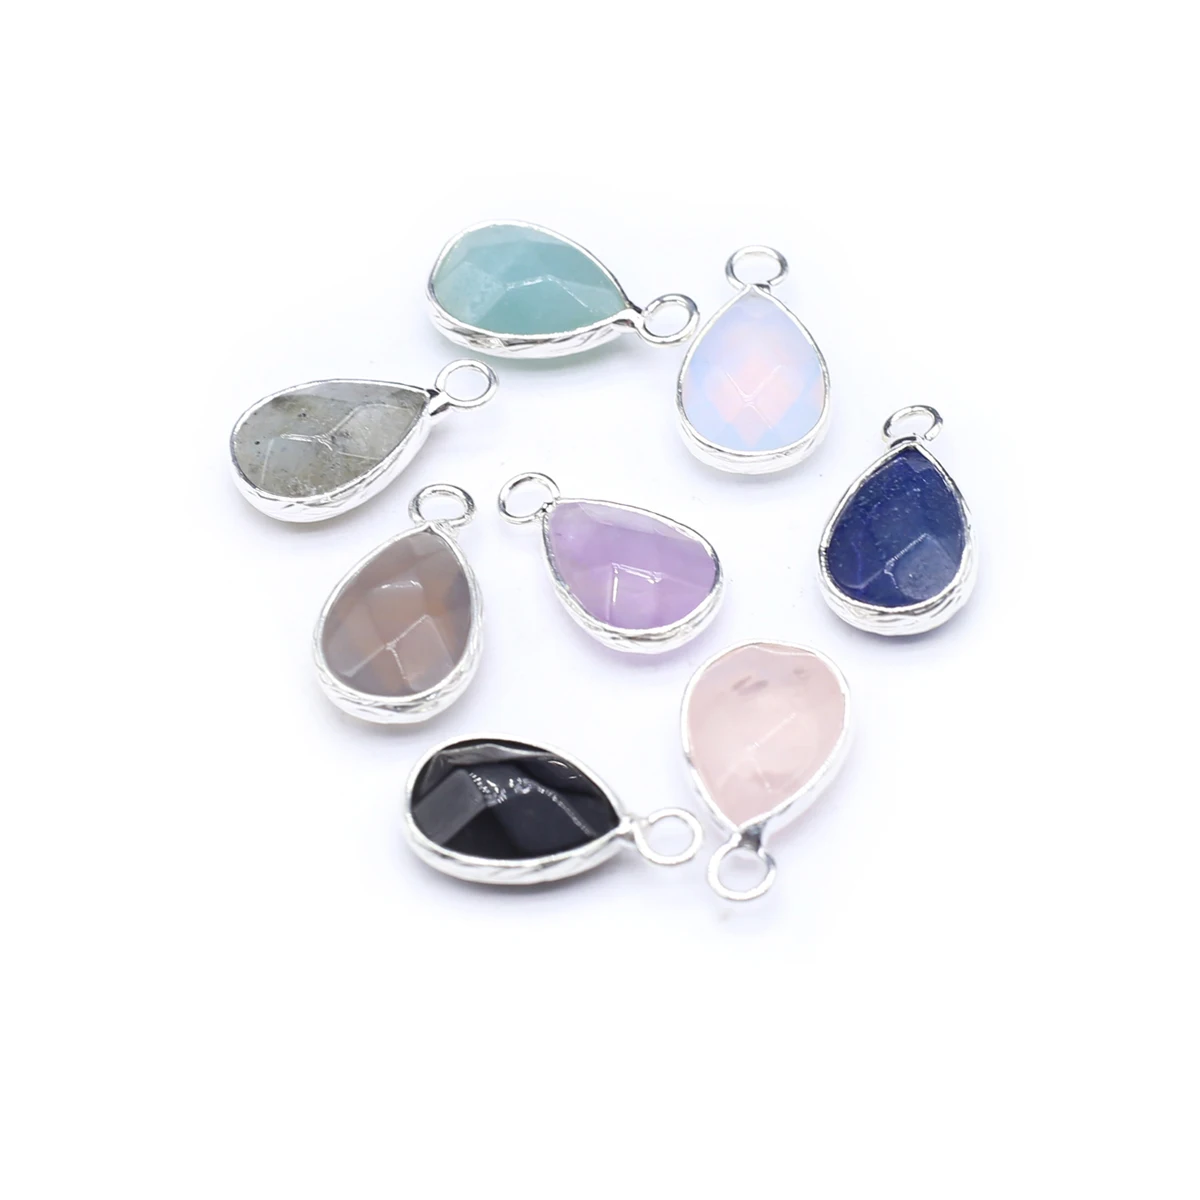 

10 Pcs Water Drop Shape Faceted Random Healing Crystal Stone Pendants Agate Charms Silvery Edge for Making Jewelry Necklace Gift